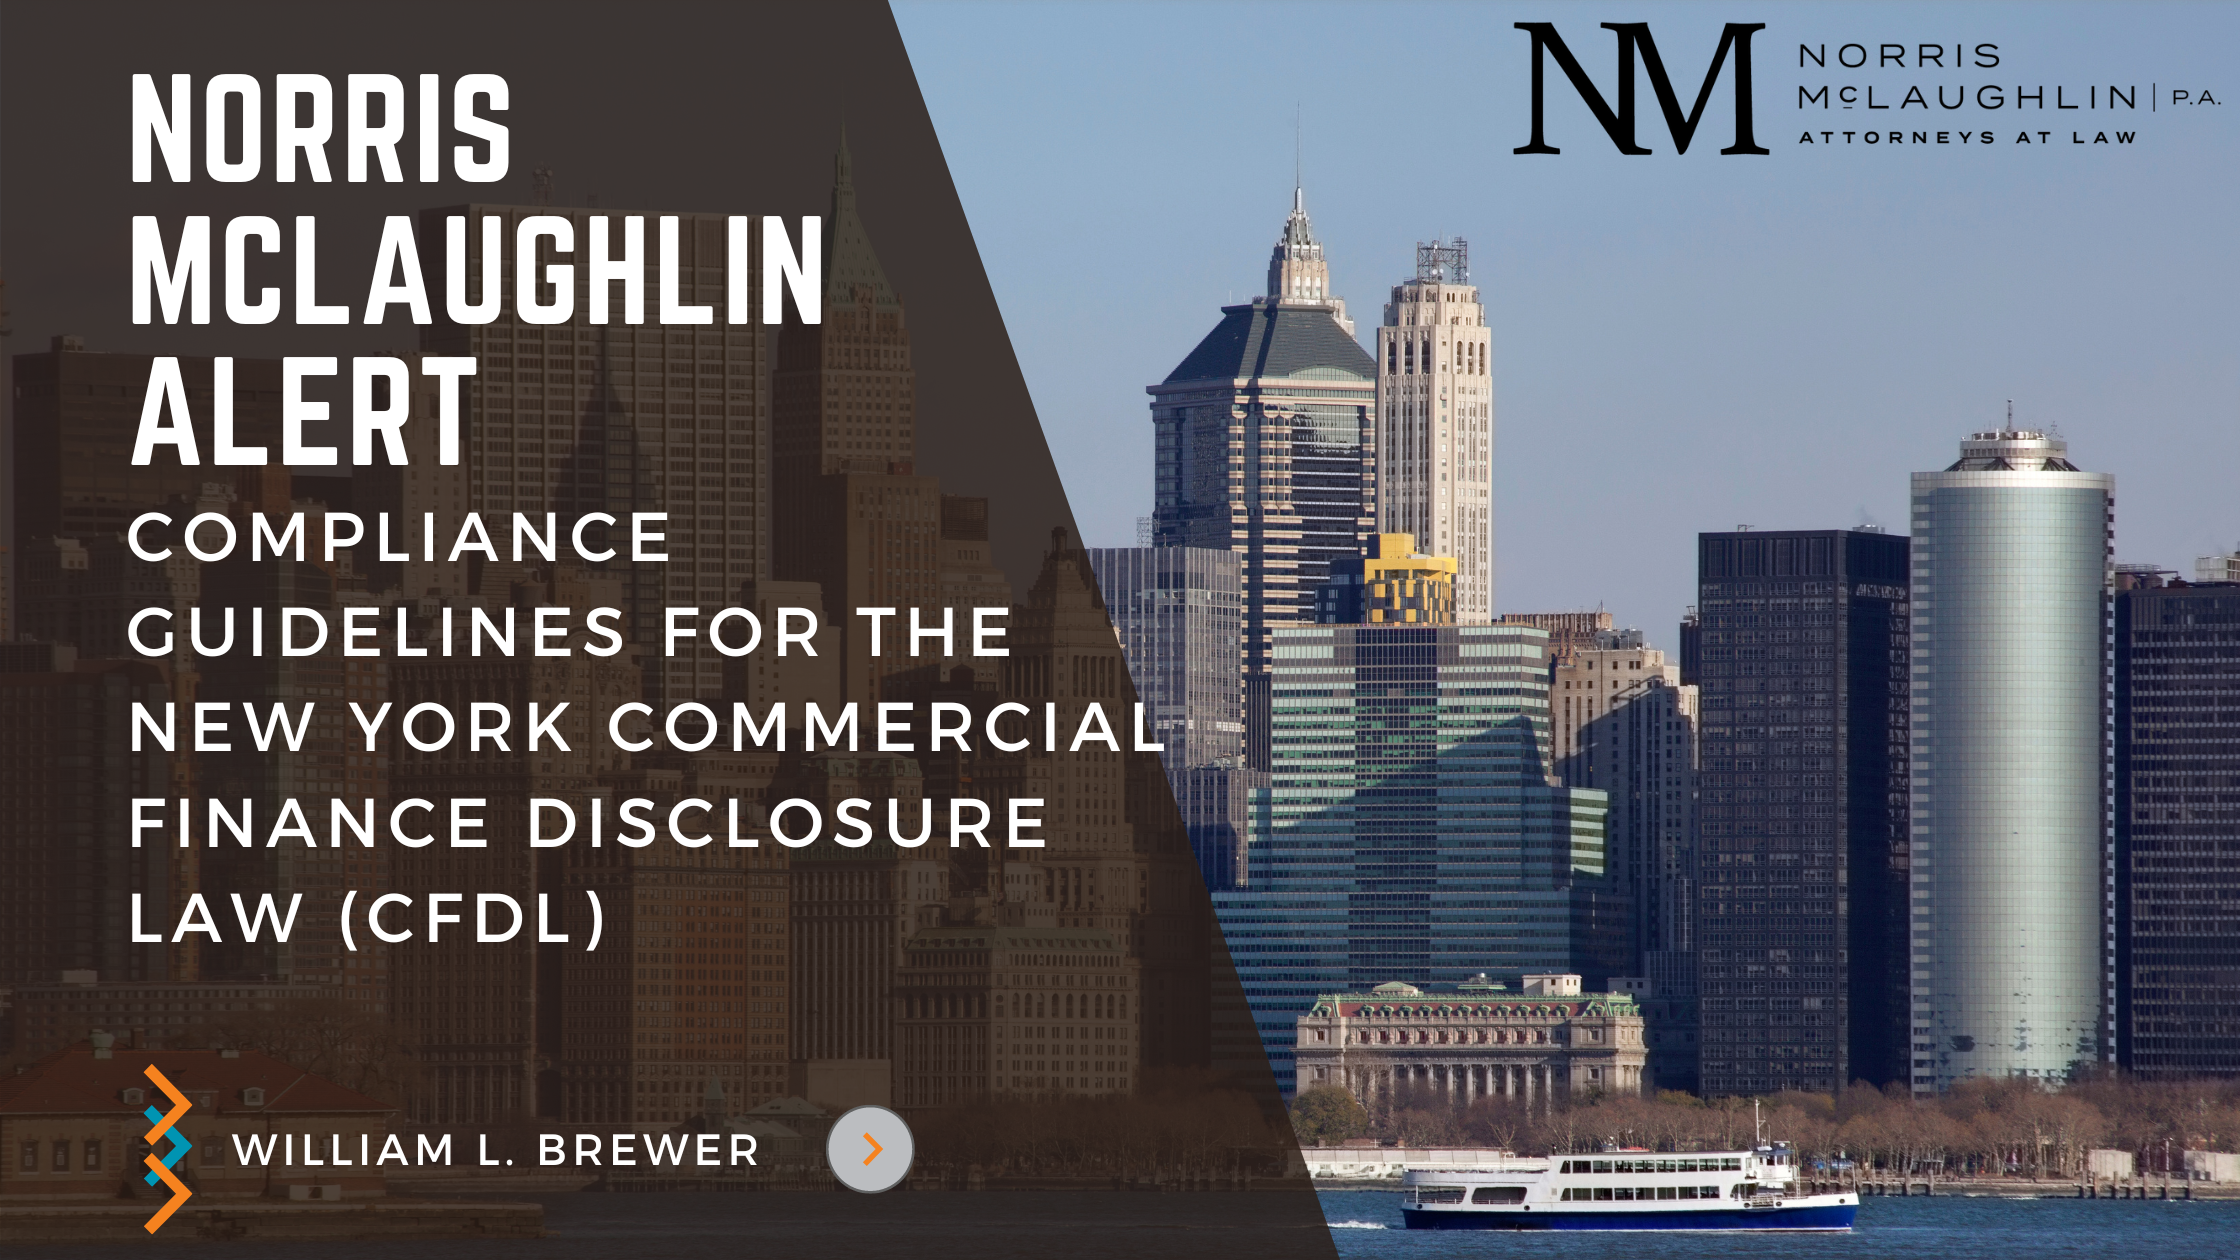 Compliance Guidelines for the New York Commercial Finance Disclosure Law (CFDL)